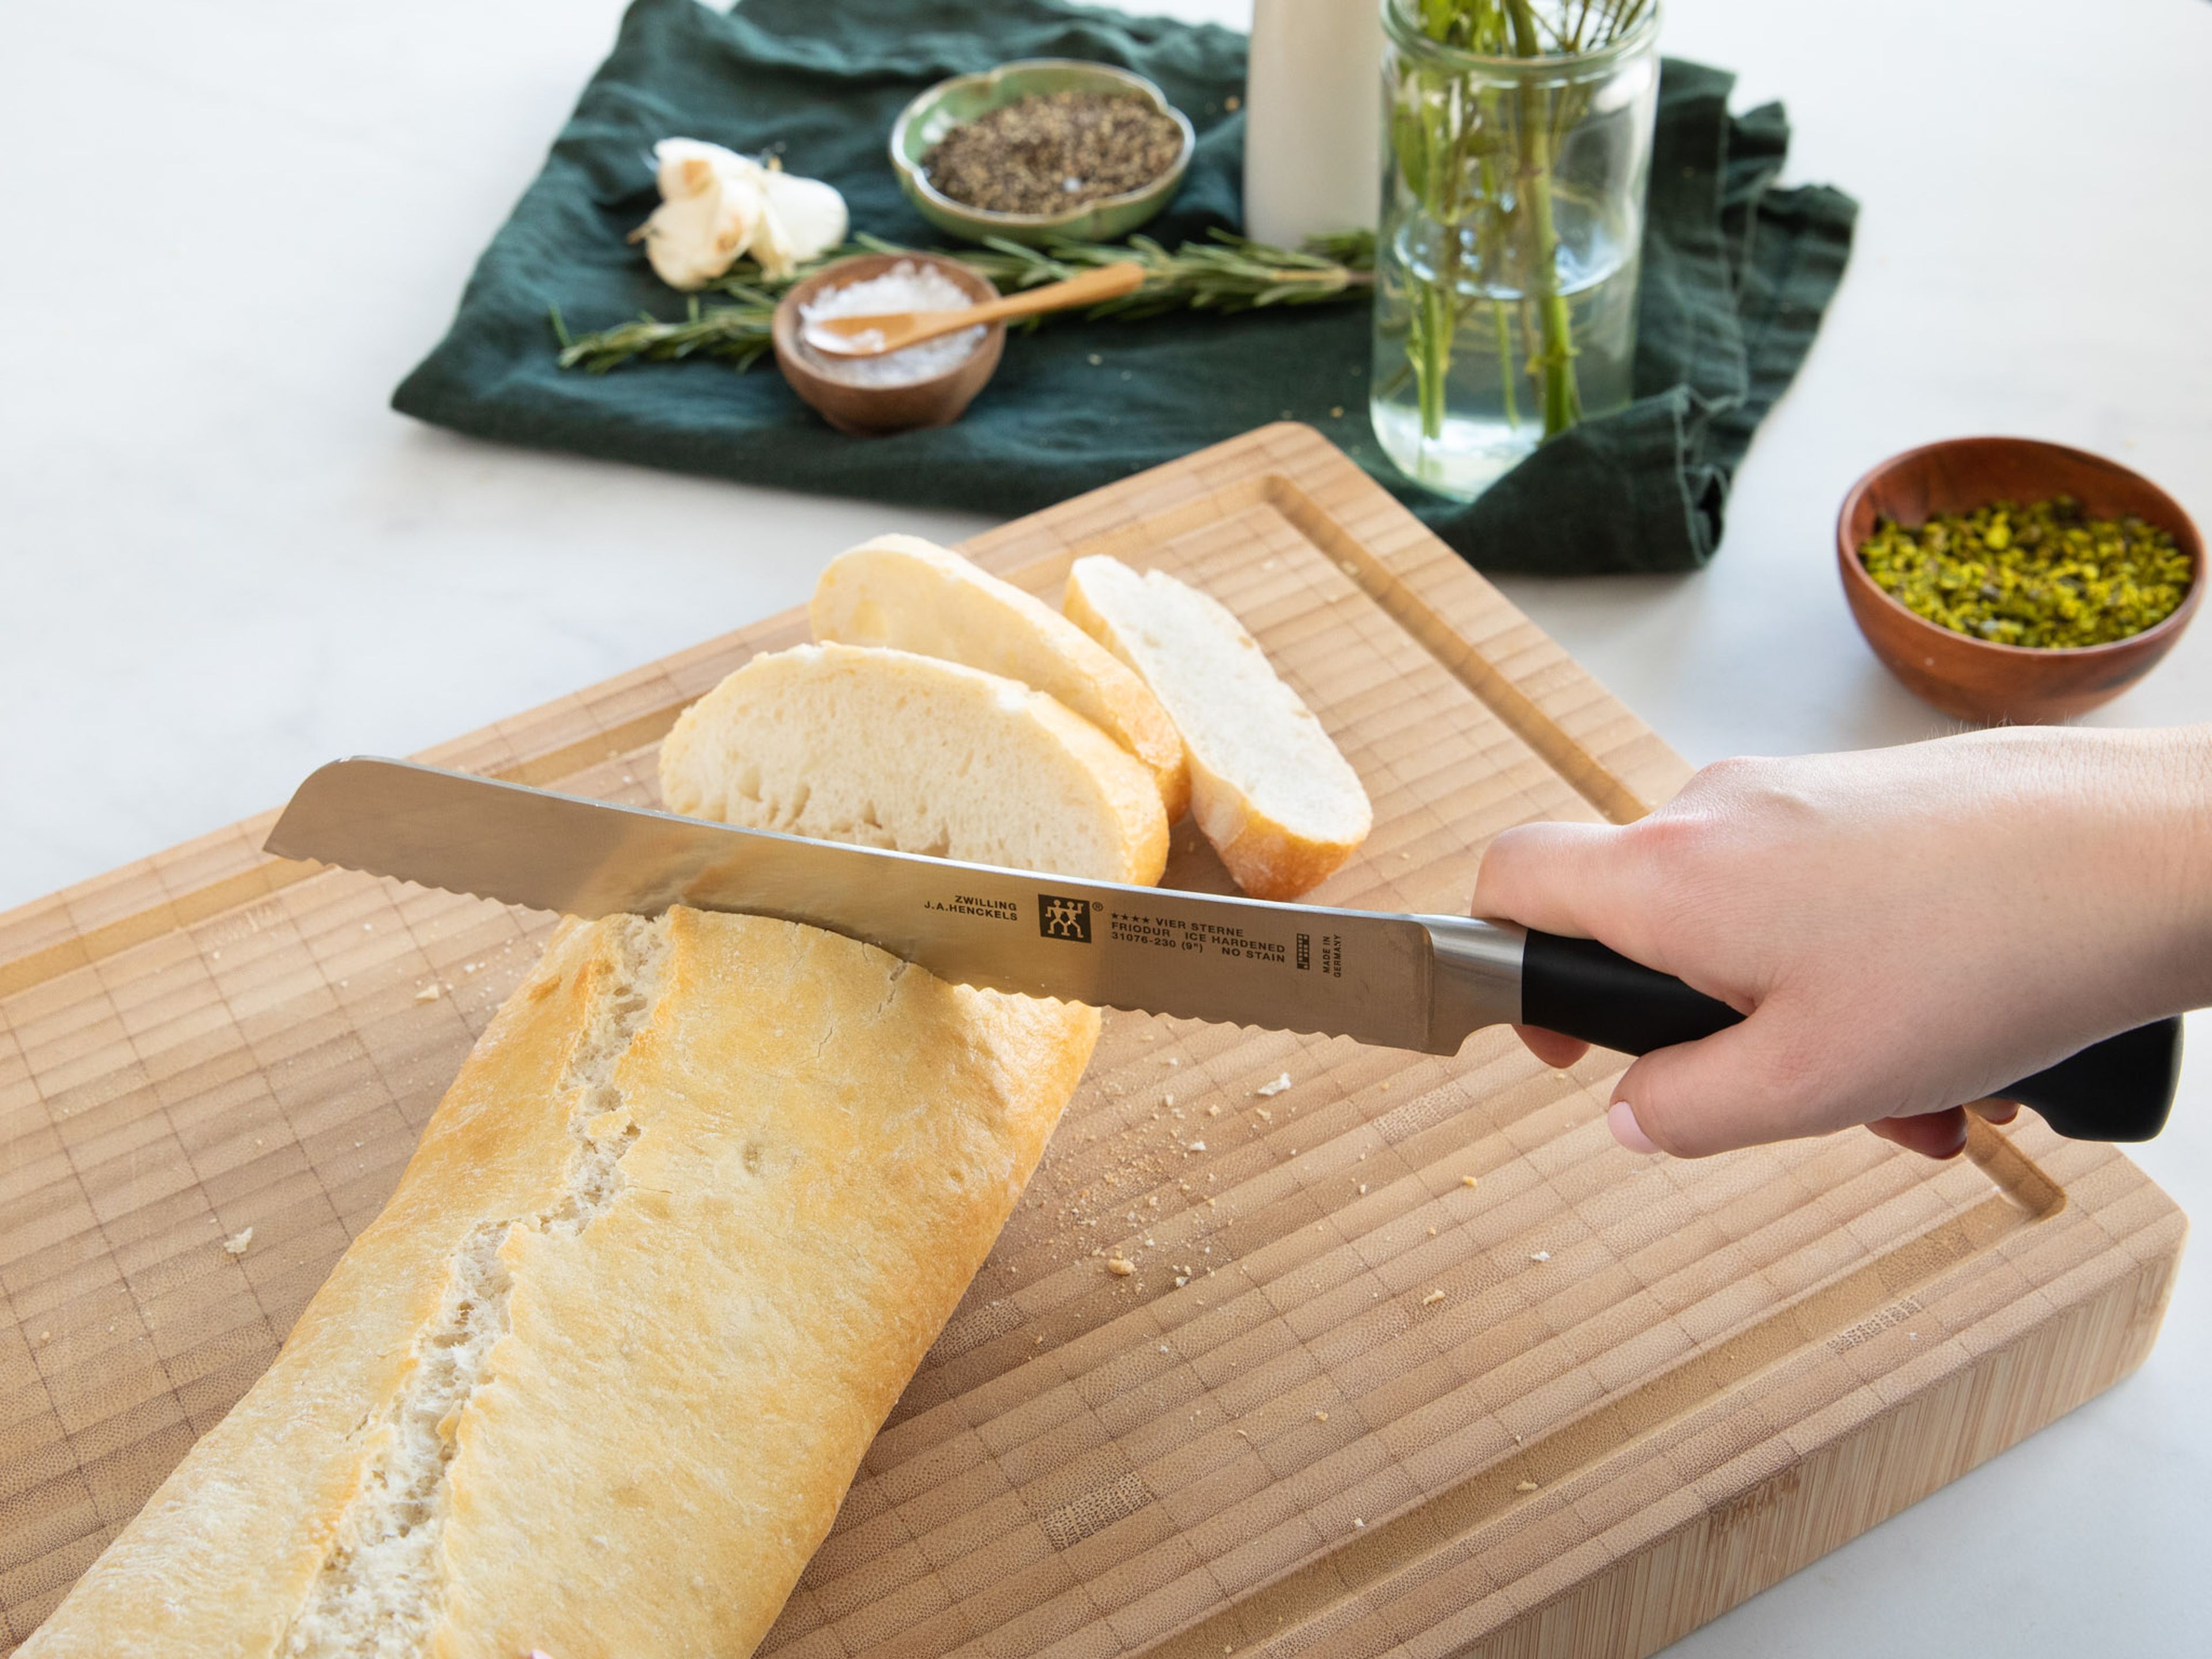 Slice ciabatta, transfer to a baking sheet, and drizzle with remaining olive oil. After the feta cheese has baked for 10 min., transfer the ciabatta to the oven as well. Roast it for the remaining 15 min. This way, the feta cheese and ciabatta will be done around the same time.